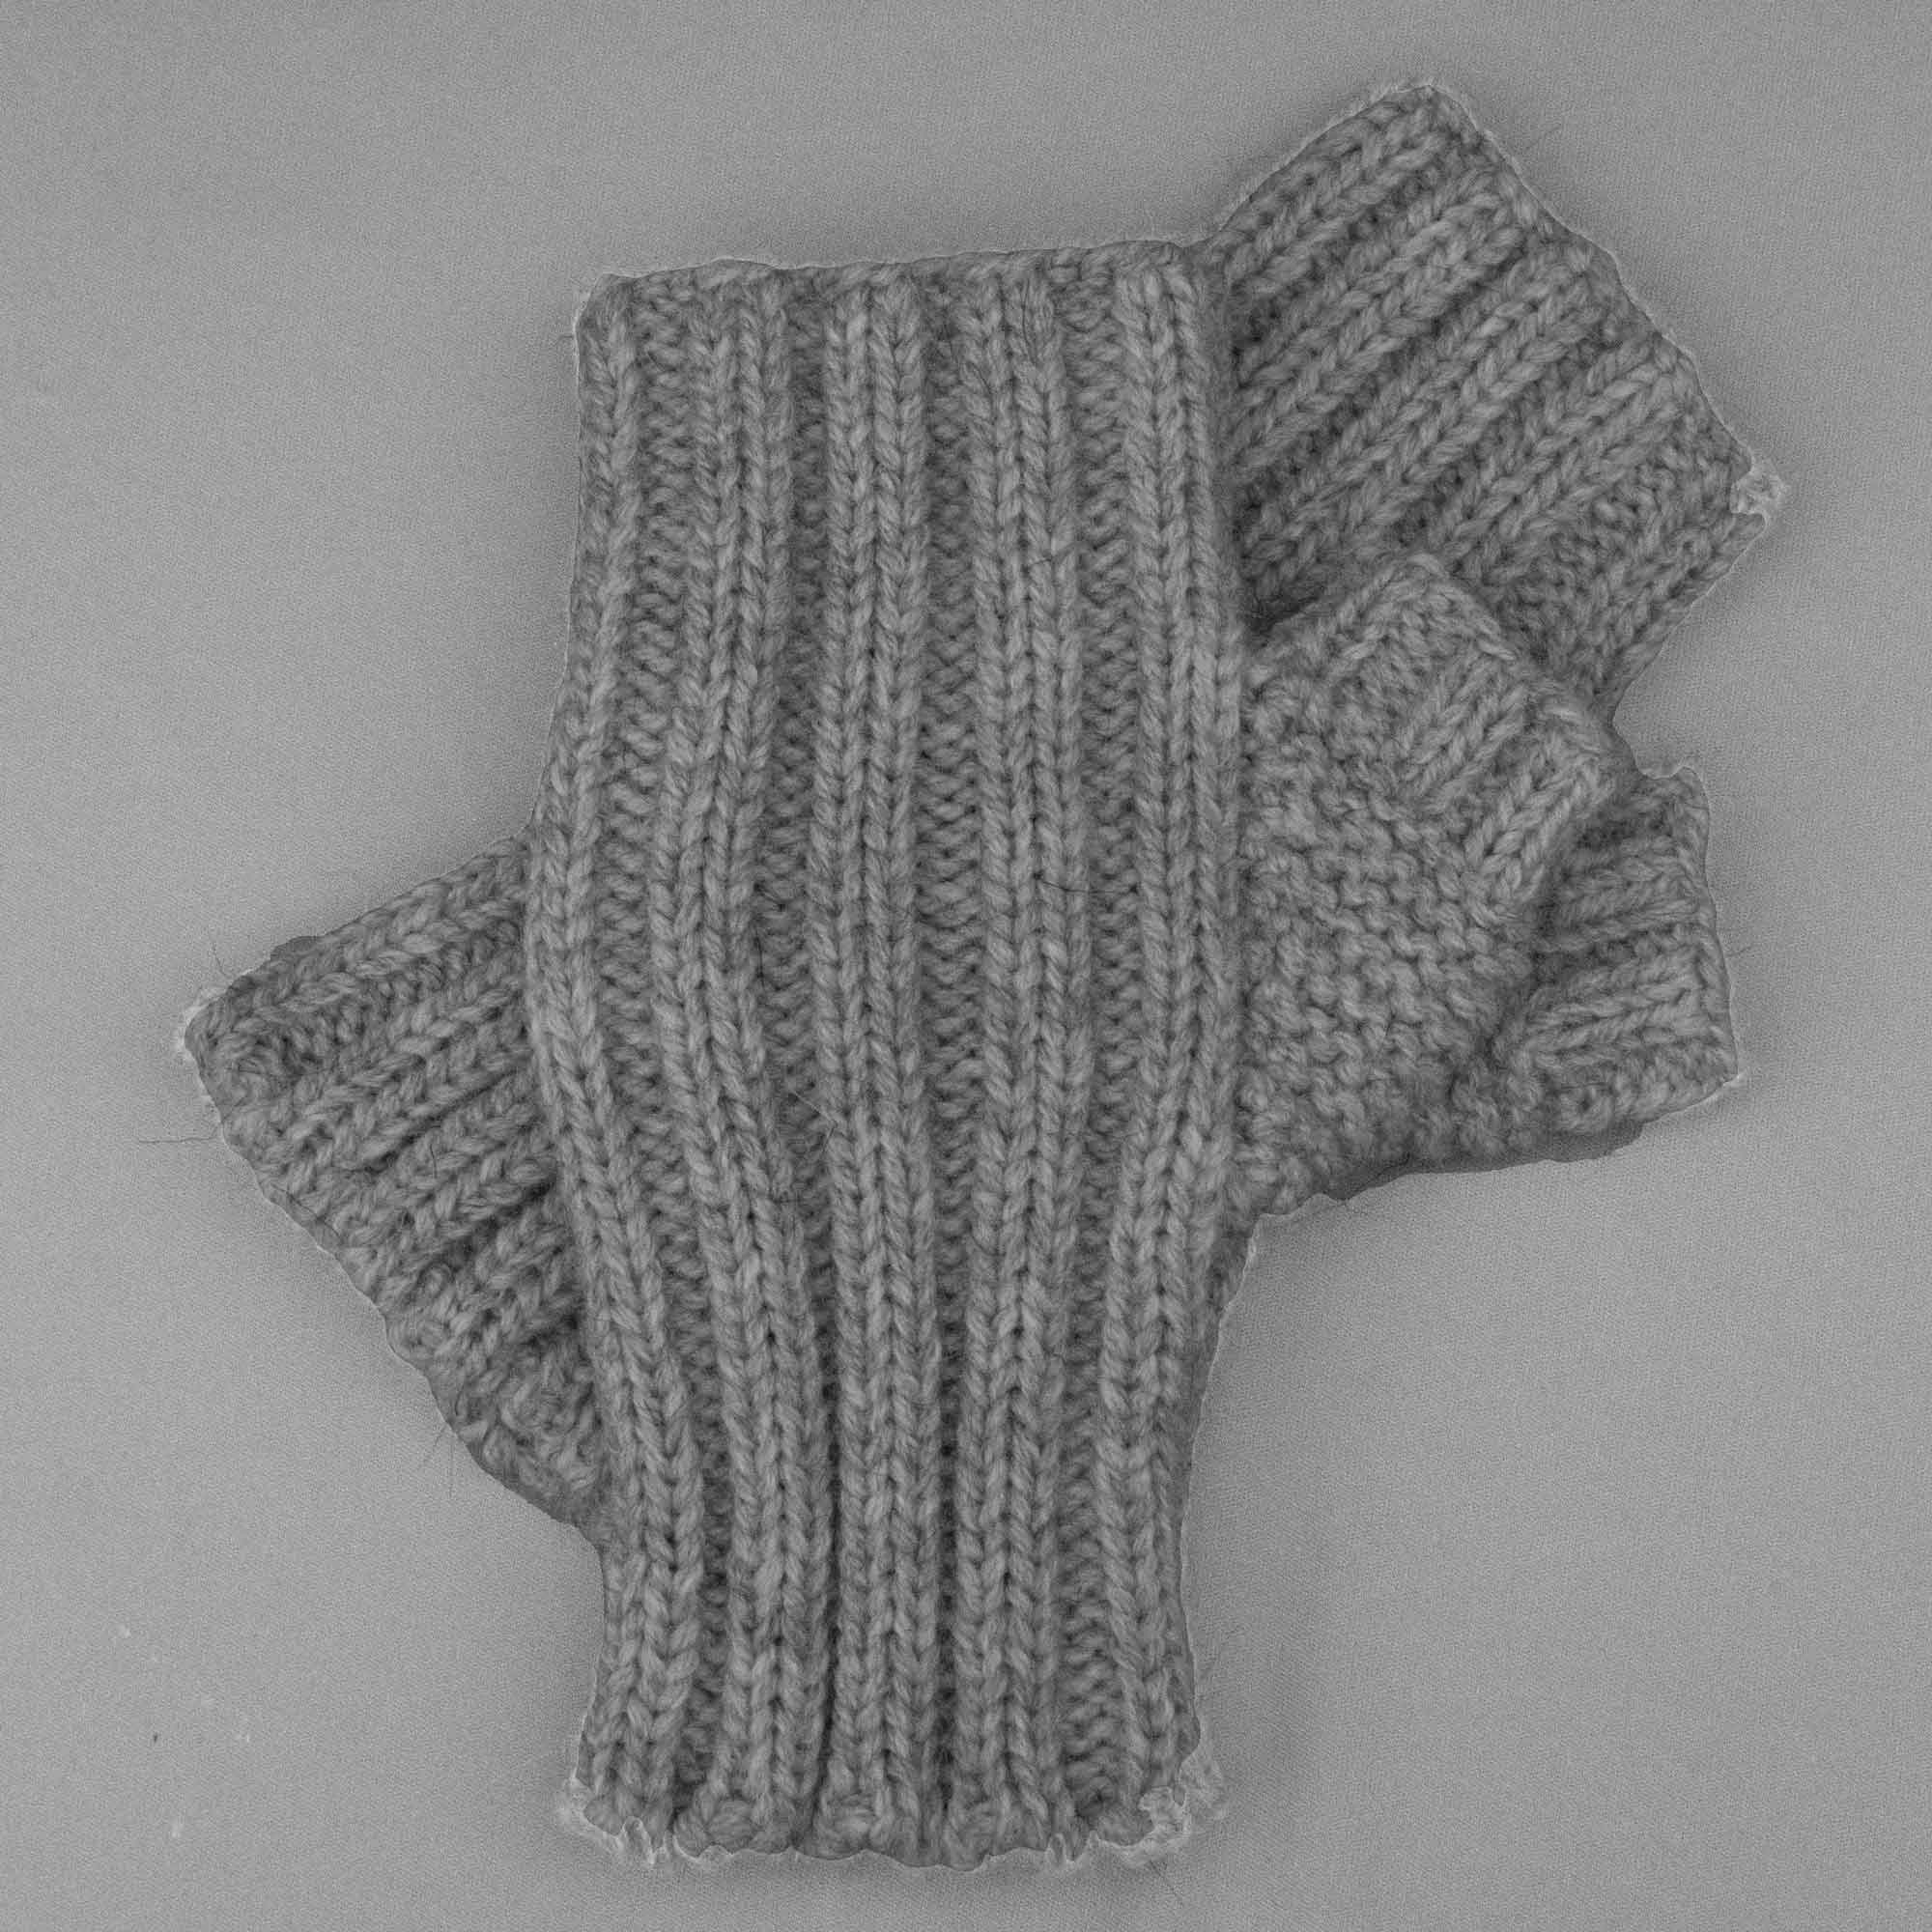 Wrist Warmers Accessories Gloves & Mittens Mittens & Muffs Hand Knitted M-L Outlander Gift Size Adult S-M Colours of Scotland 100% Merino Wool Mittens Fingerless Mitts Gloves 